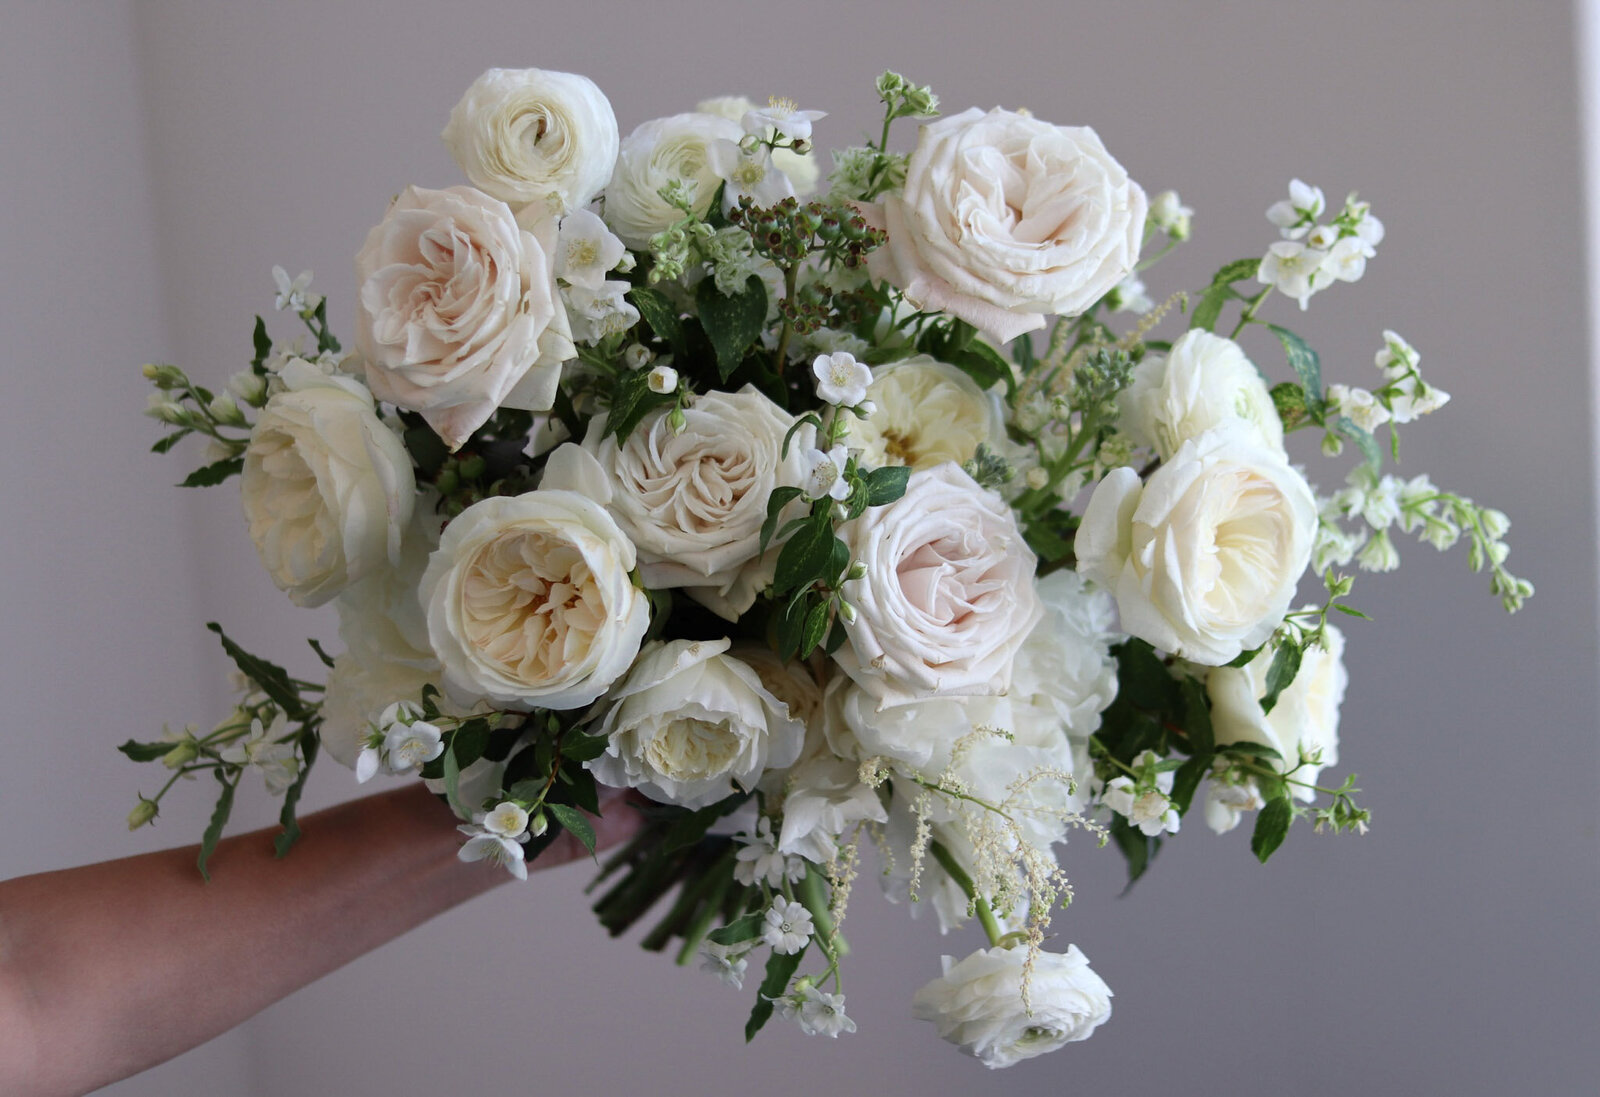 Beautiful white bridal bouquet with roses, ranunculus, mock orange, astilbe, blueberry foliage, and peonies.